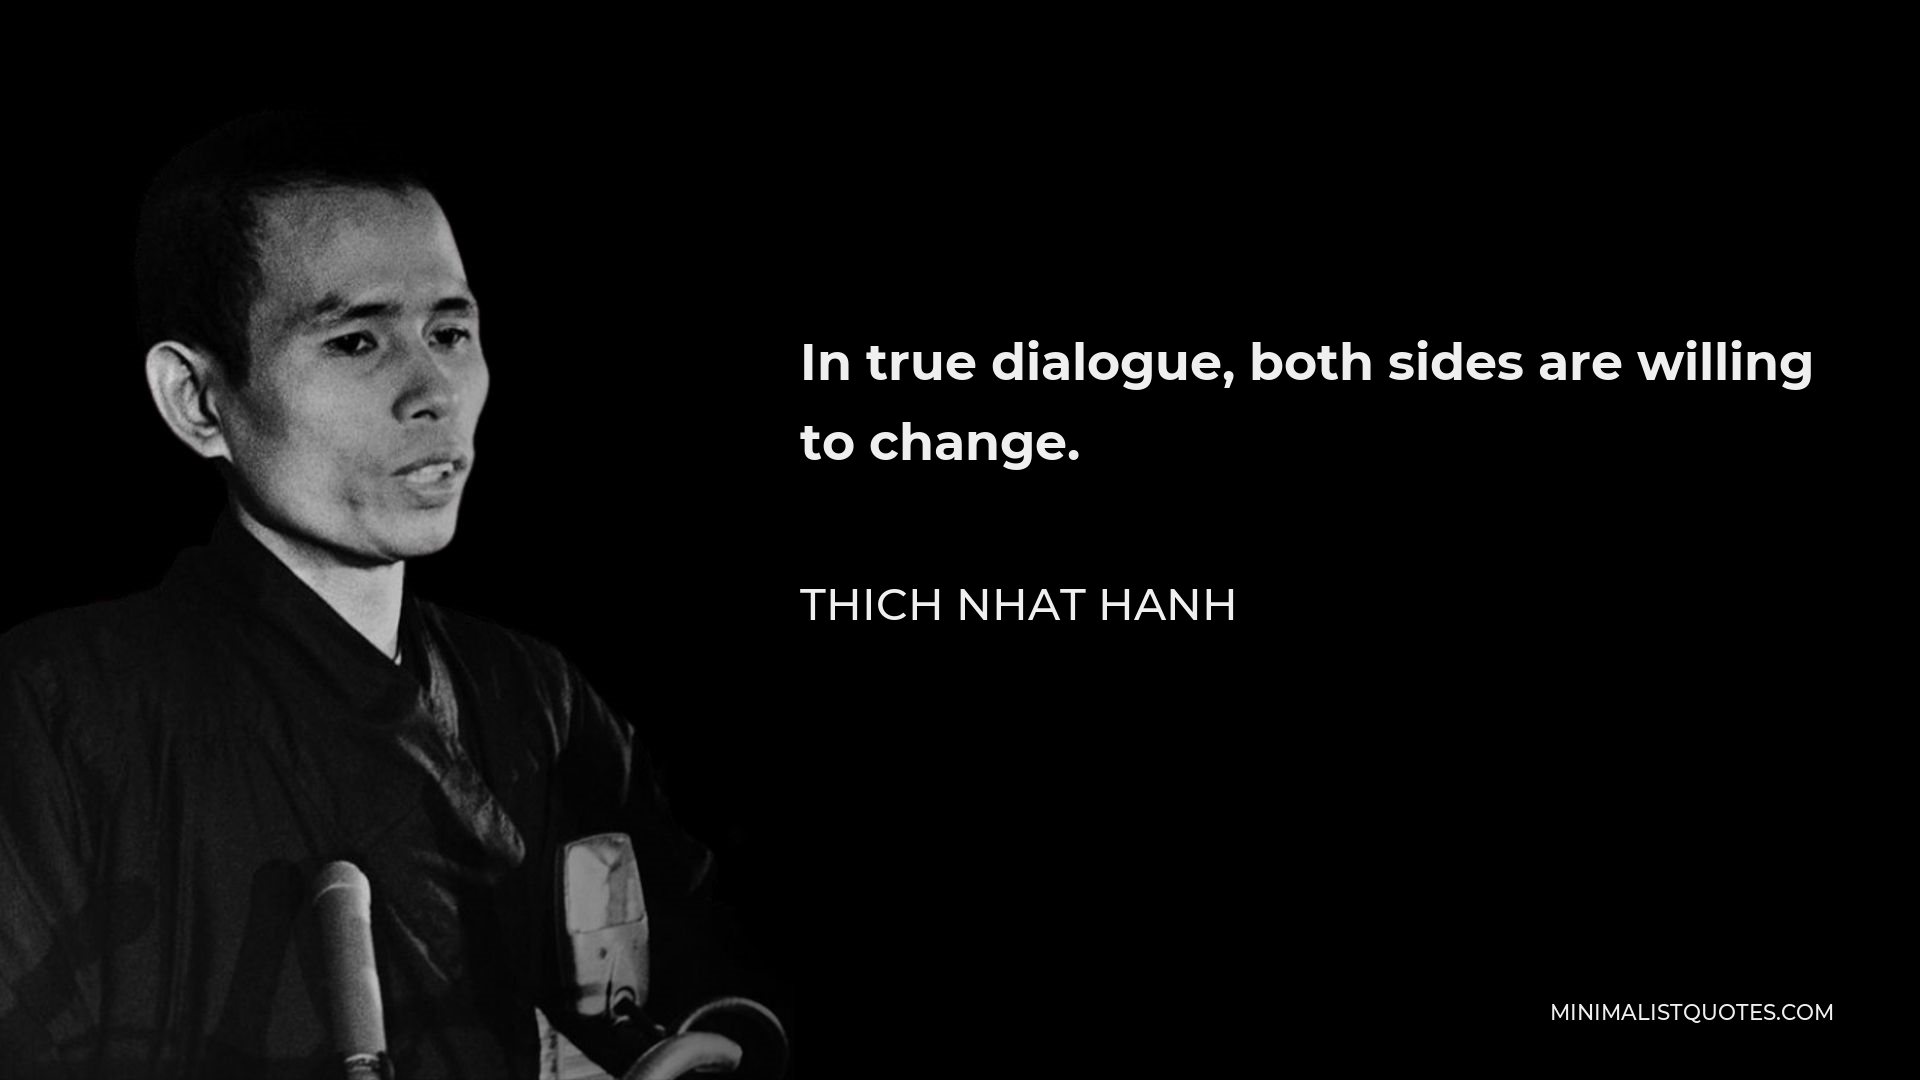 Thich Nhat Hanh Quote - In true dialogue, both sides are willing to change.